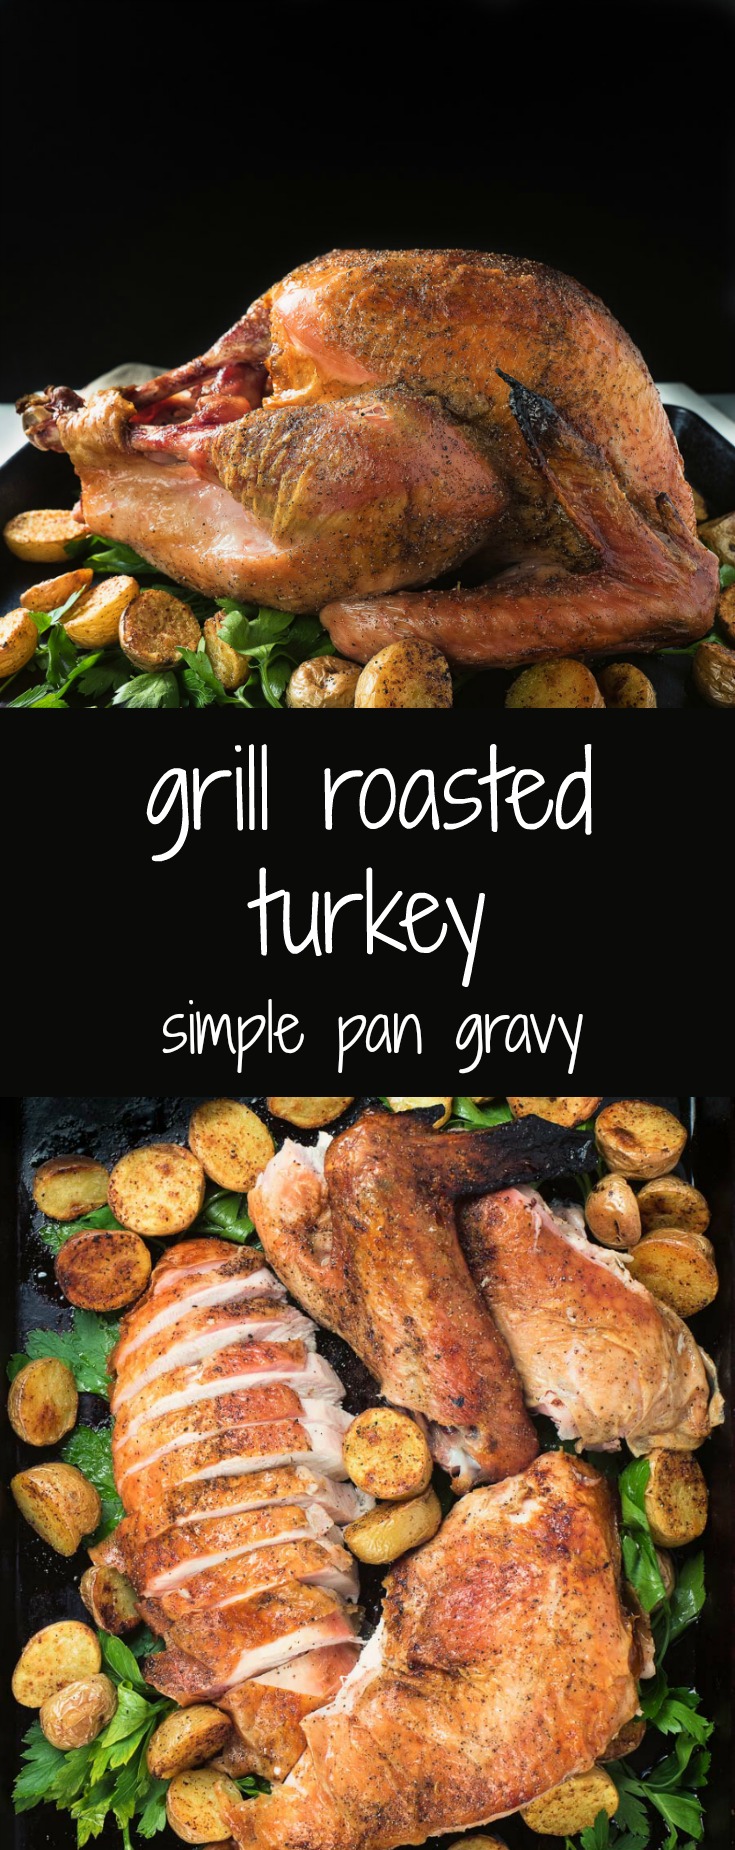 Mix it up with a grill roasted turkey dinner.